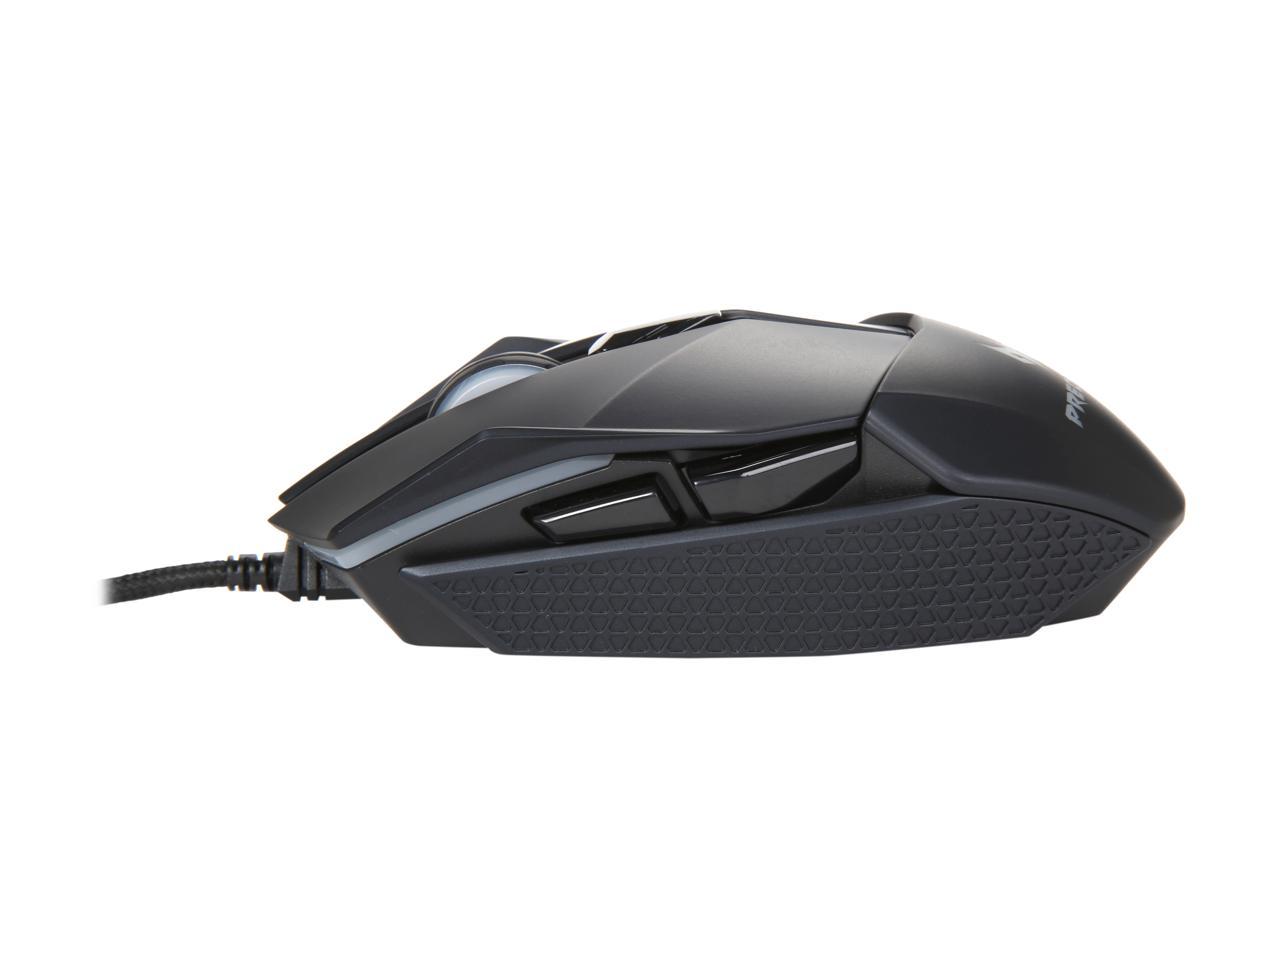 Acer Predator Cestus 500 USB Wired Gaming Mouse